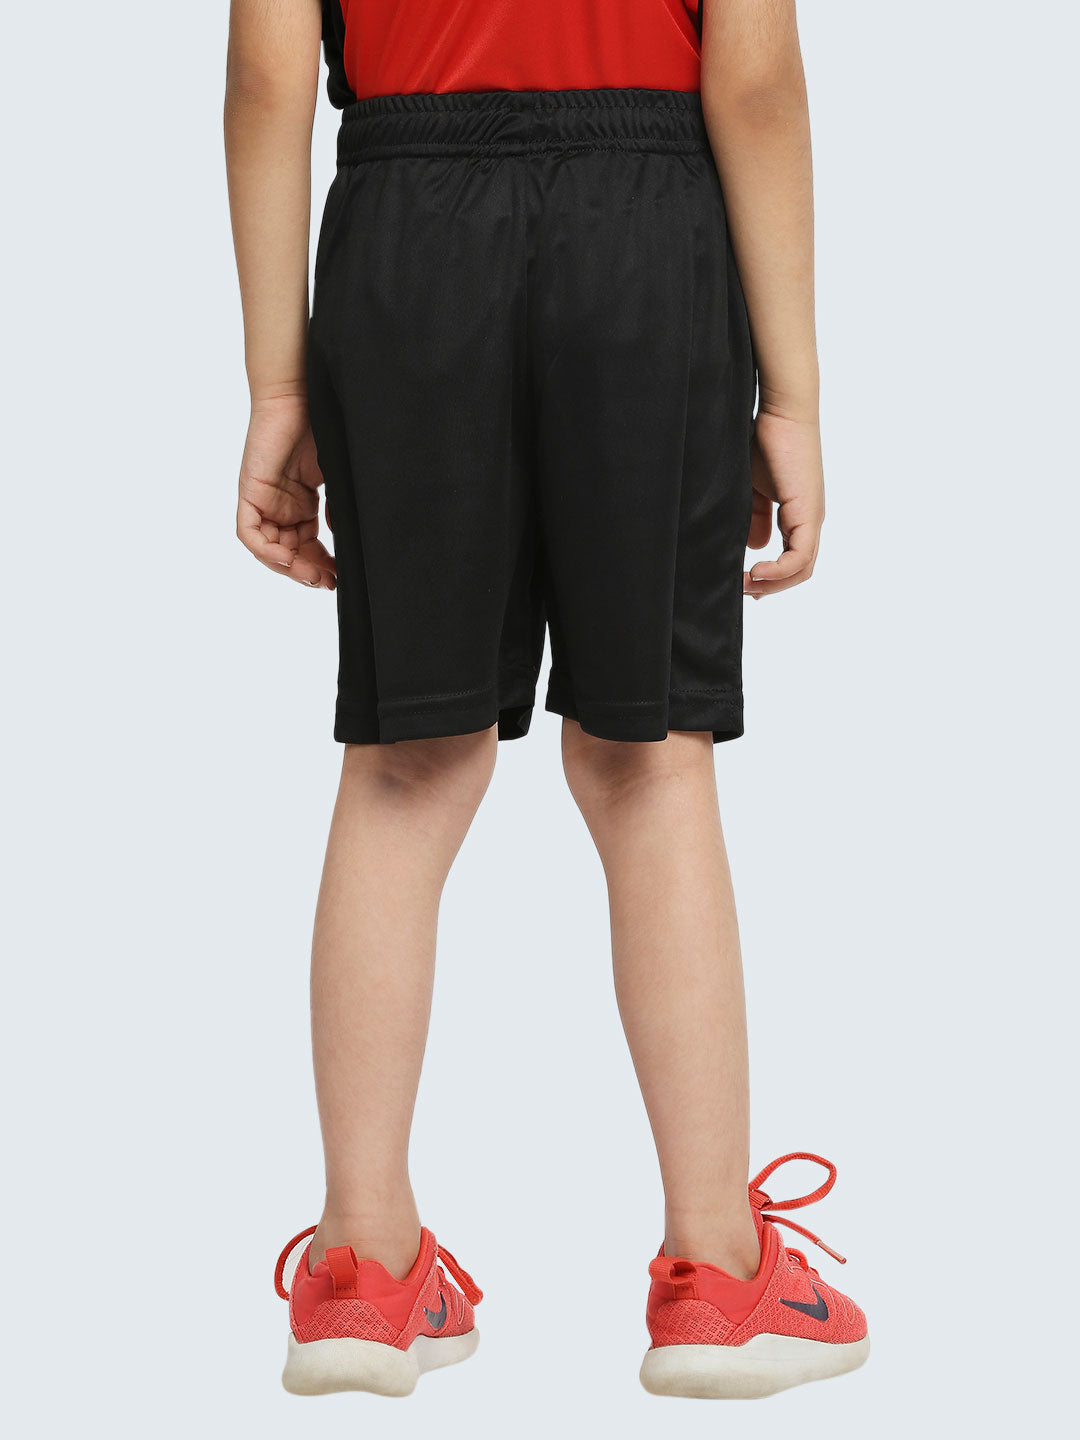 Kid's Solid Active Sports Shorts: Black - Front